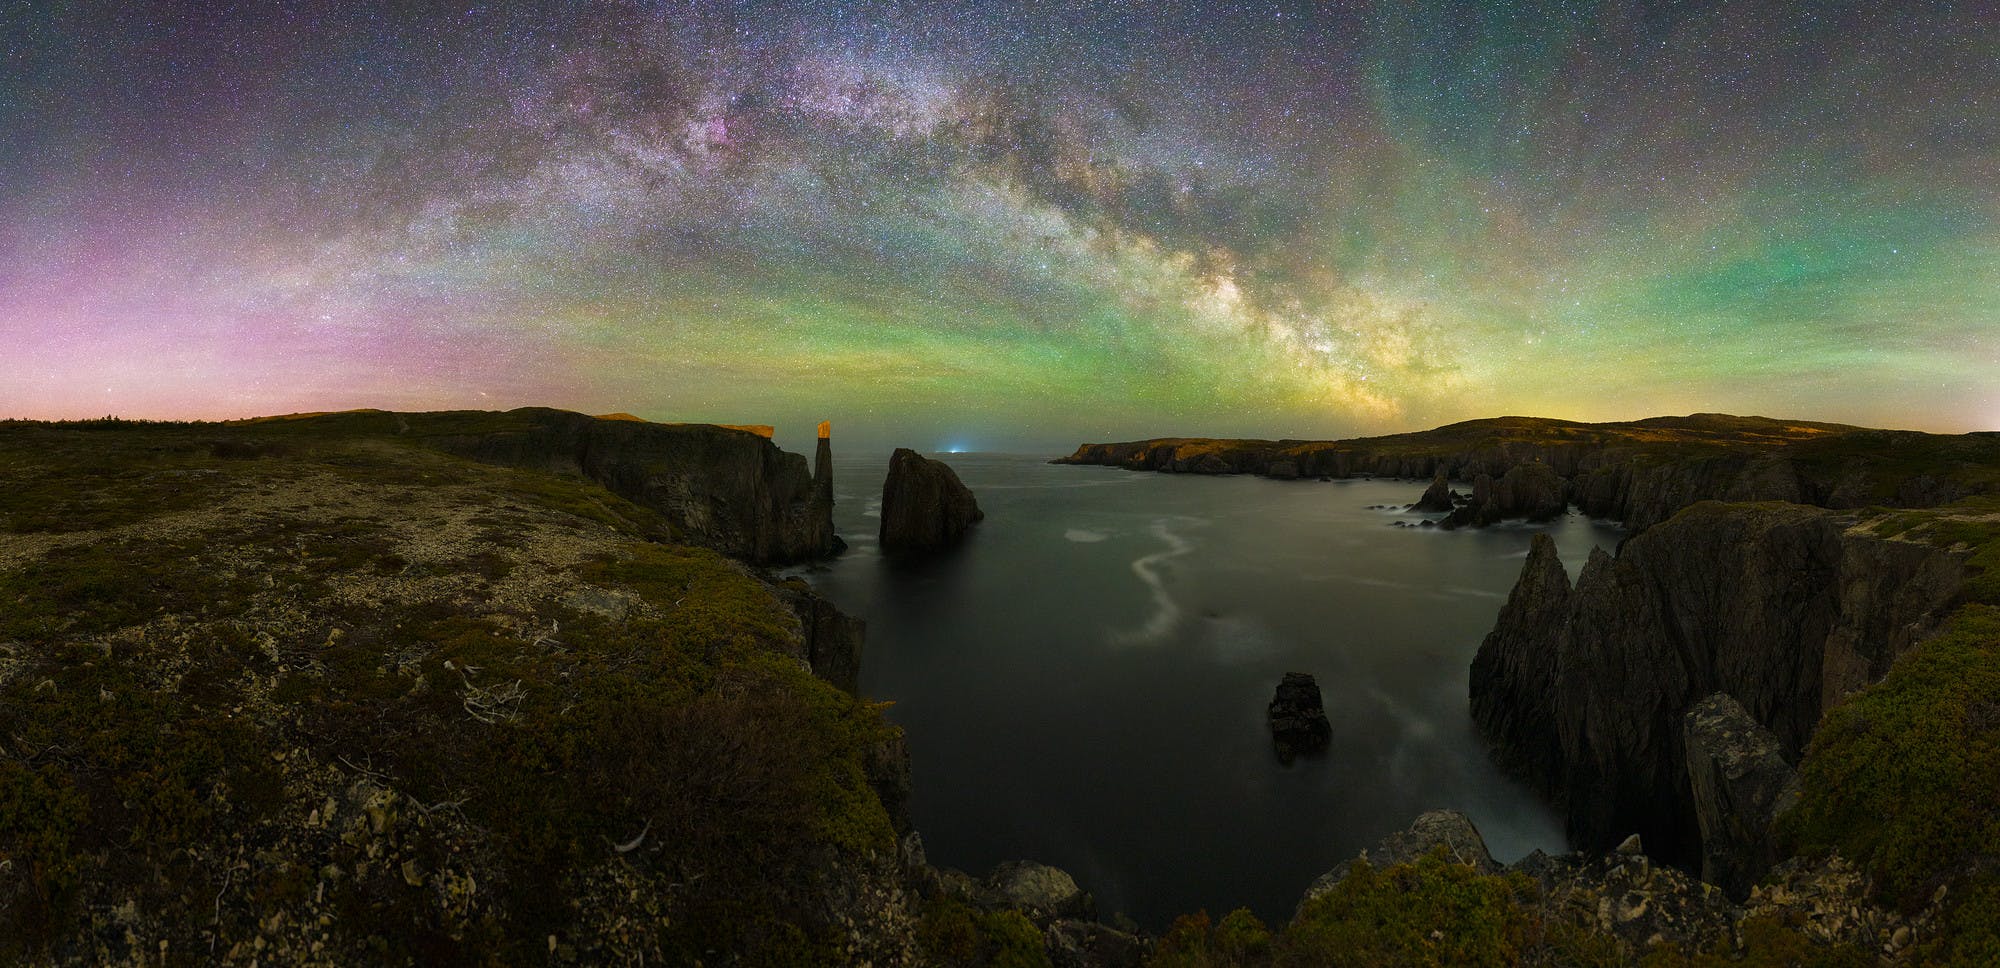 Milky Way Over Cable John Cove